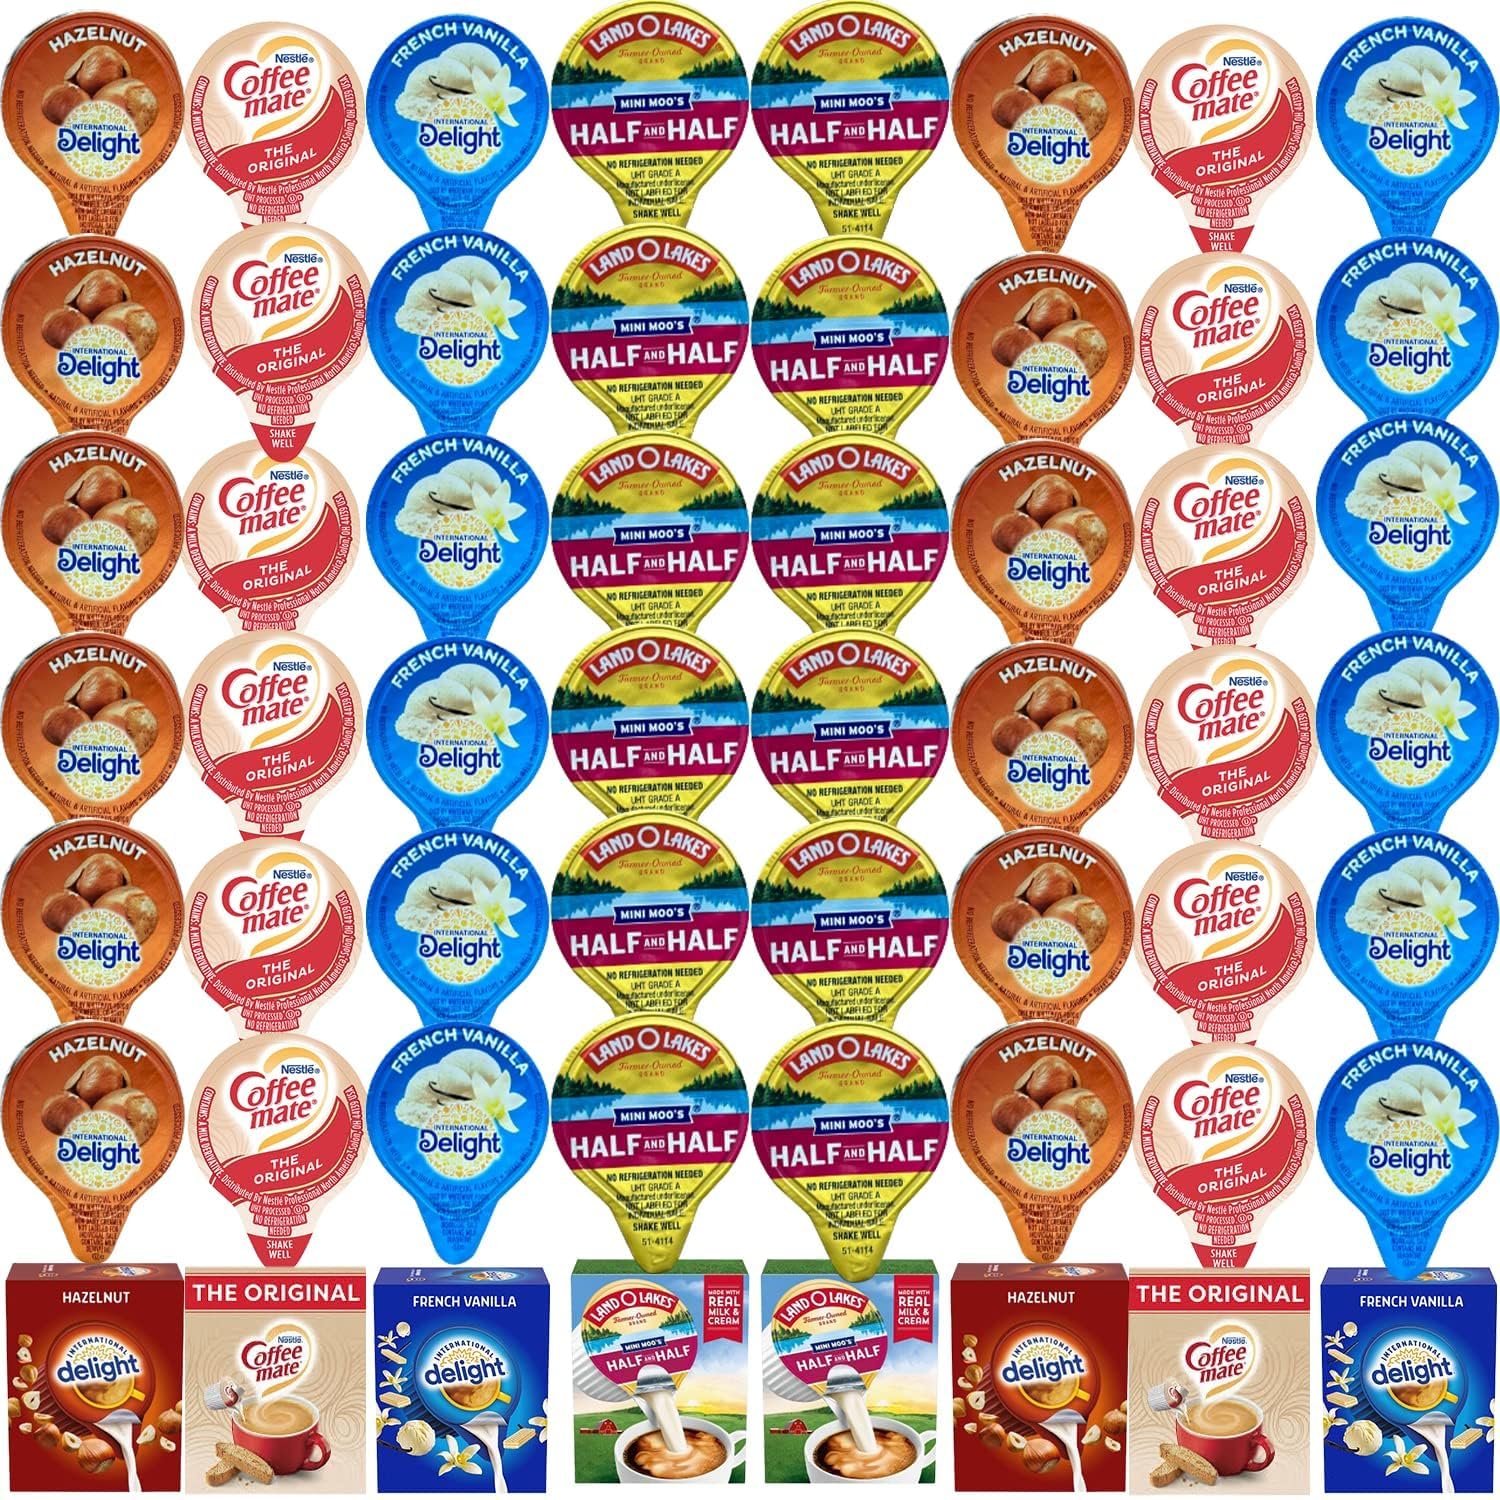 Coffee Creamer Singles Variety Pack Packaged by Bools, International Delight Creamer Singles Set, Delight Mini Coffee Creamer, Coffee Mate Original & Mini Moo's 4 Flavor Assortment (48 Pack) Coffee Creamer Singles for Home, Office, Coffee, Bar, Gift